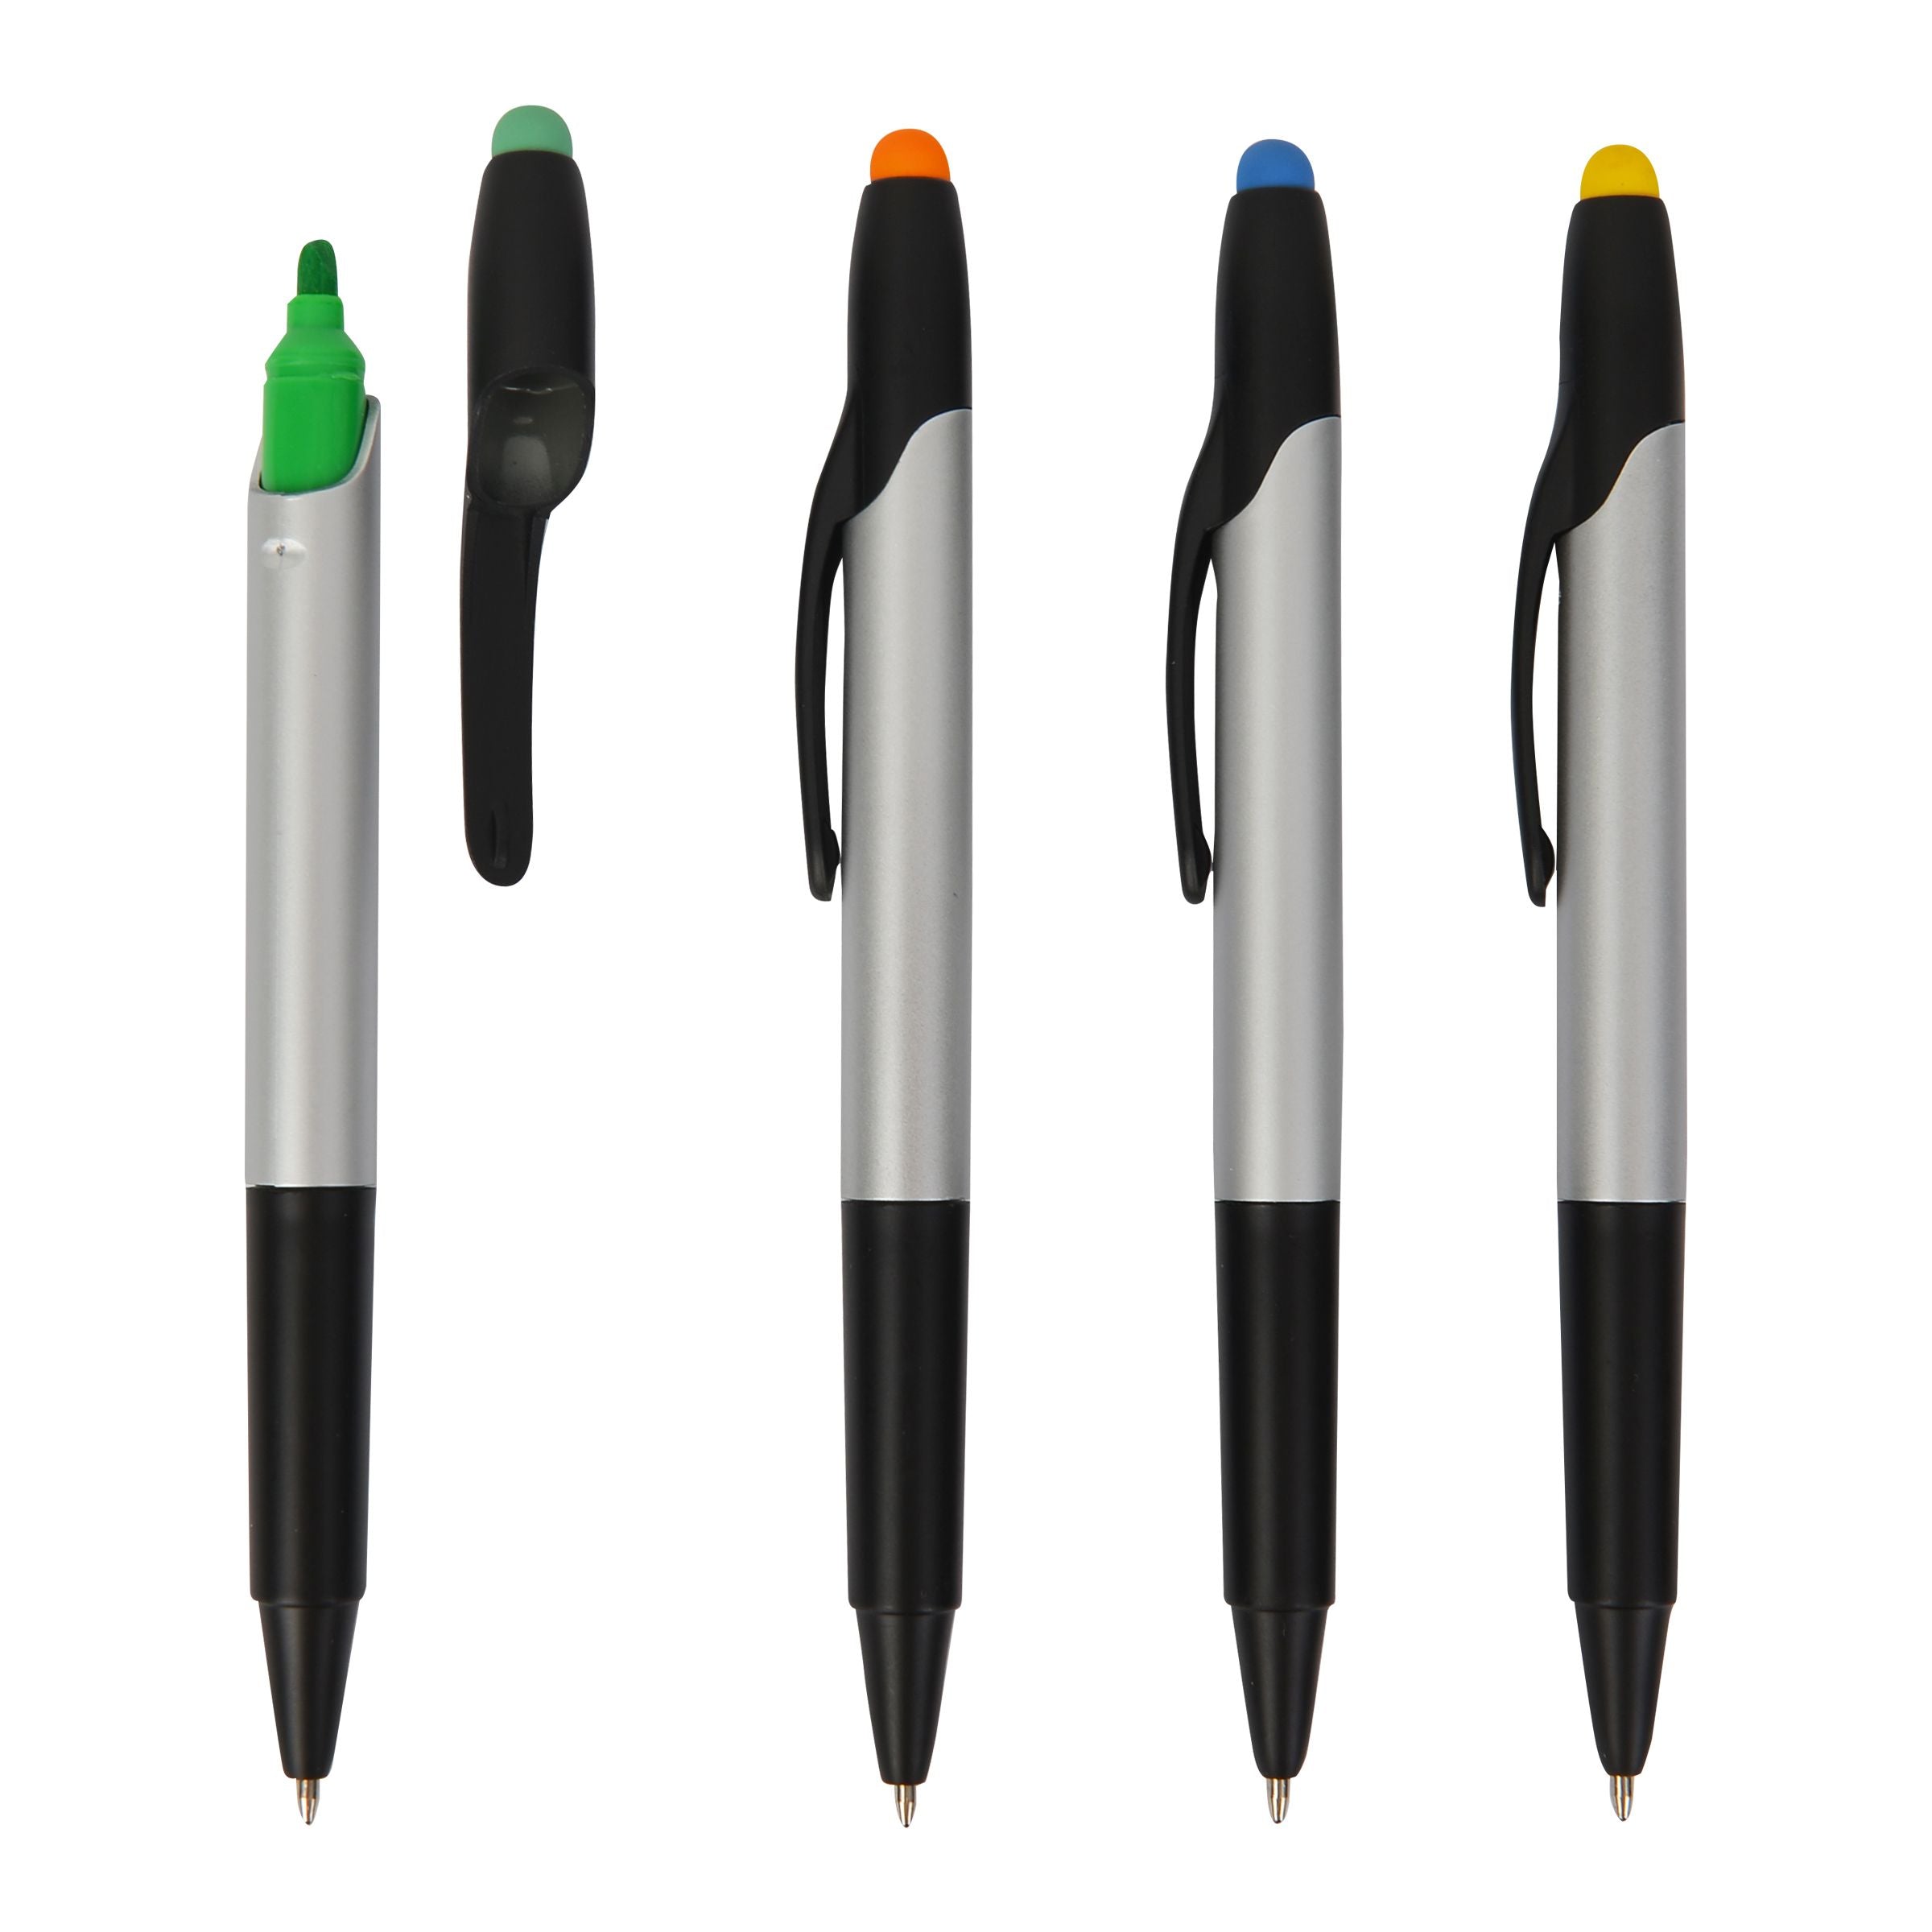 VPS-60009 - Highlighter With Ballpoint Pen and Stylus Cap